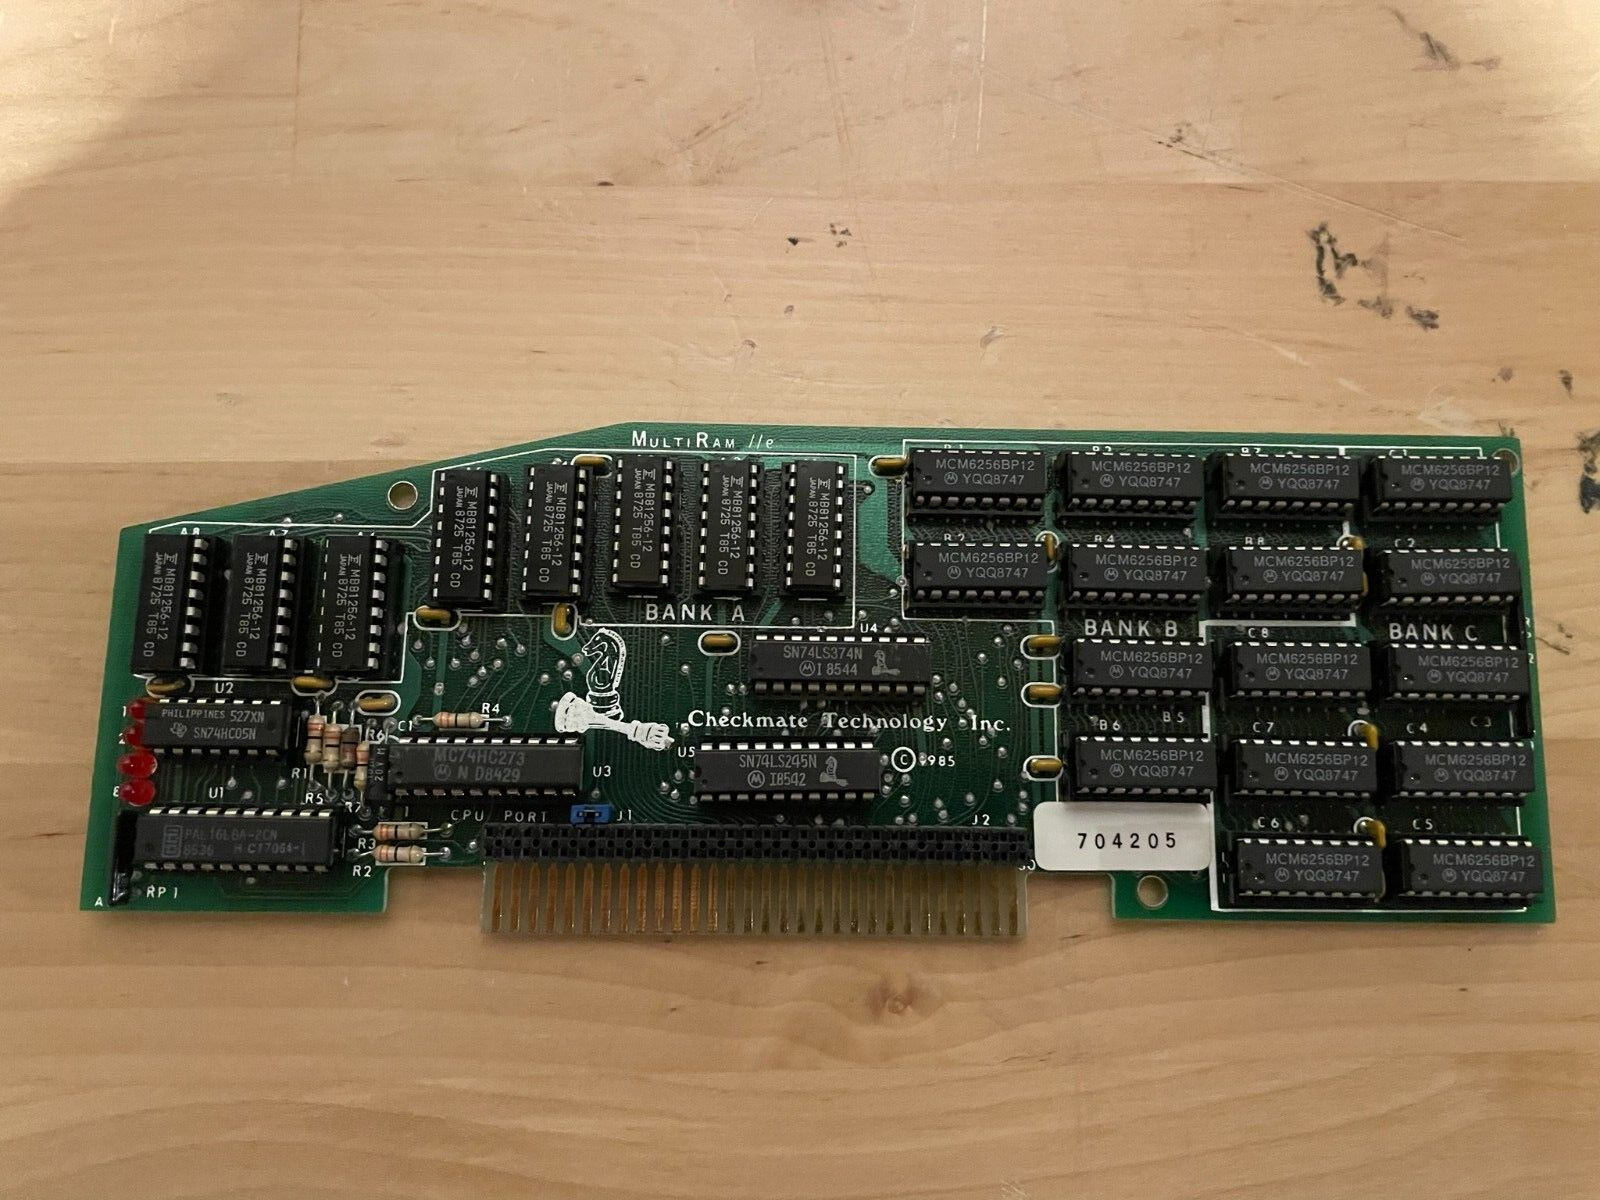 Tested: Checkmate Technology MultiRam   IIe 768KB with 80-column support